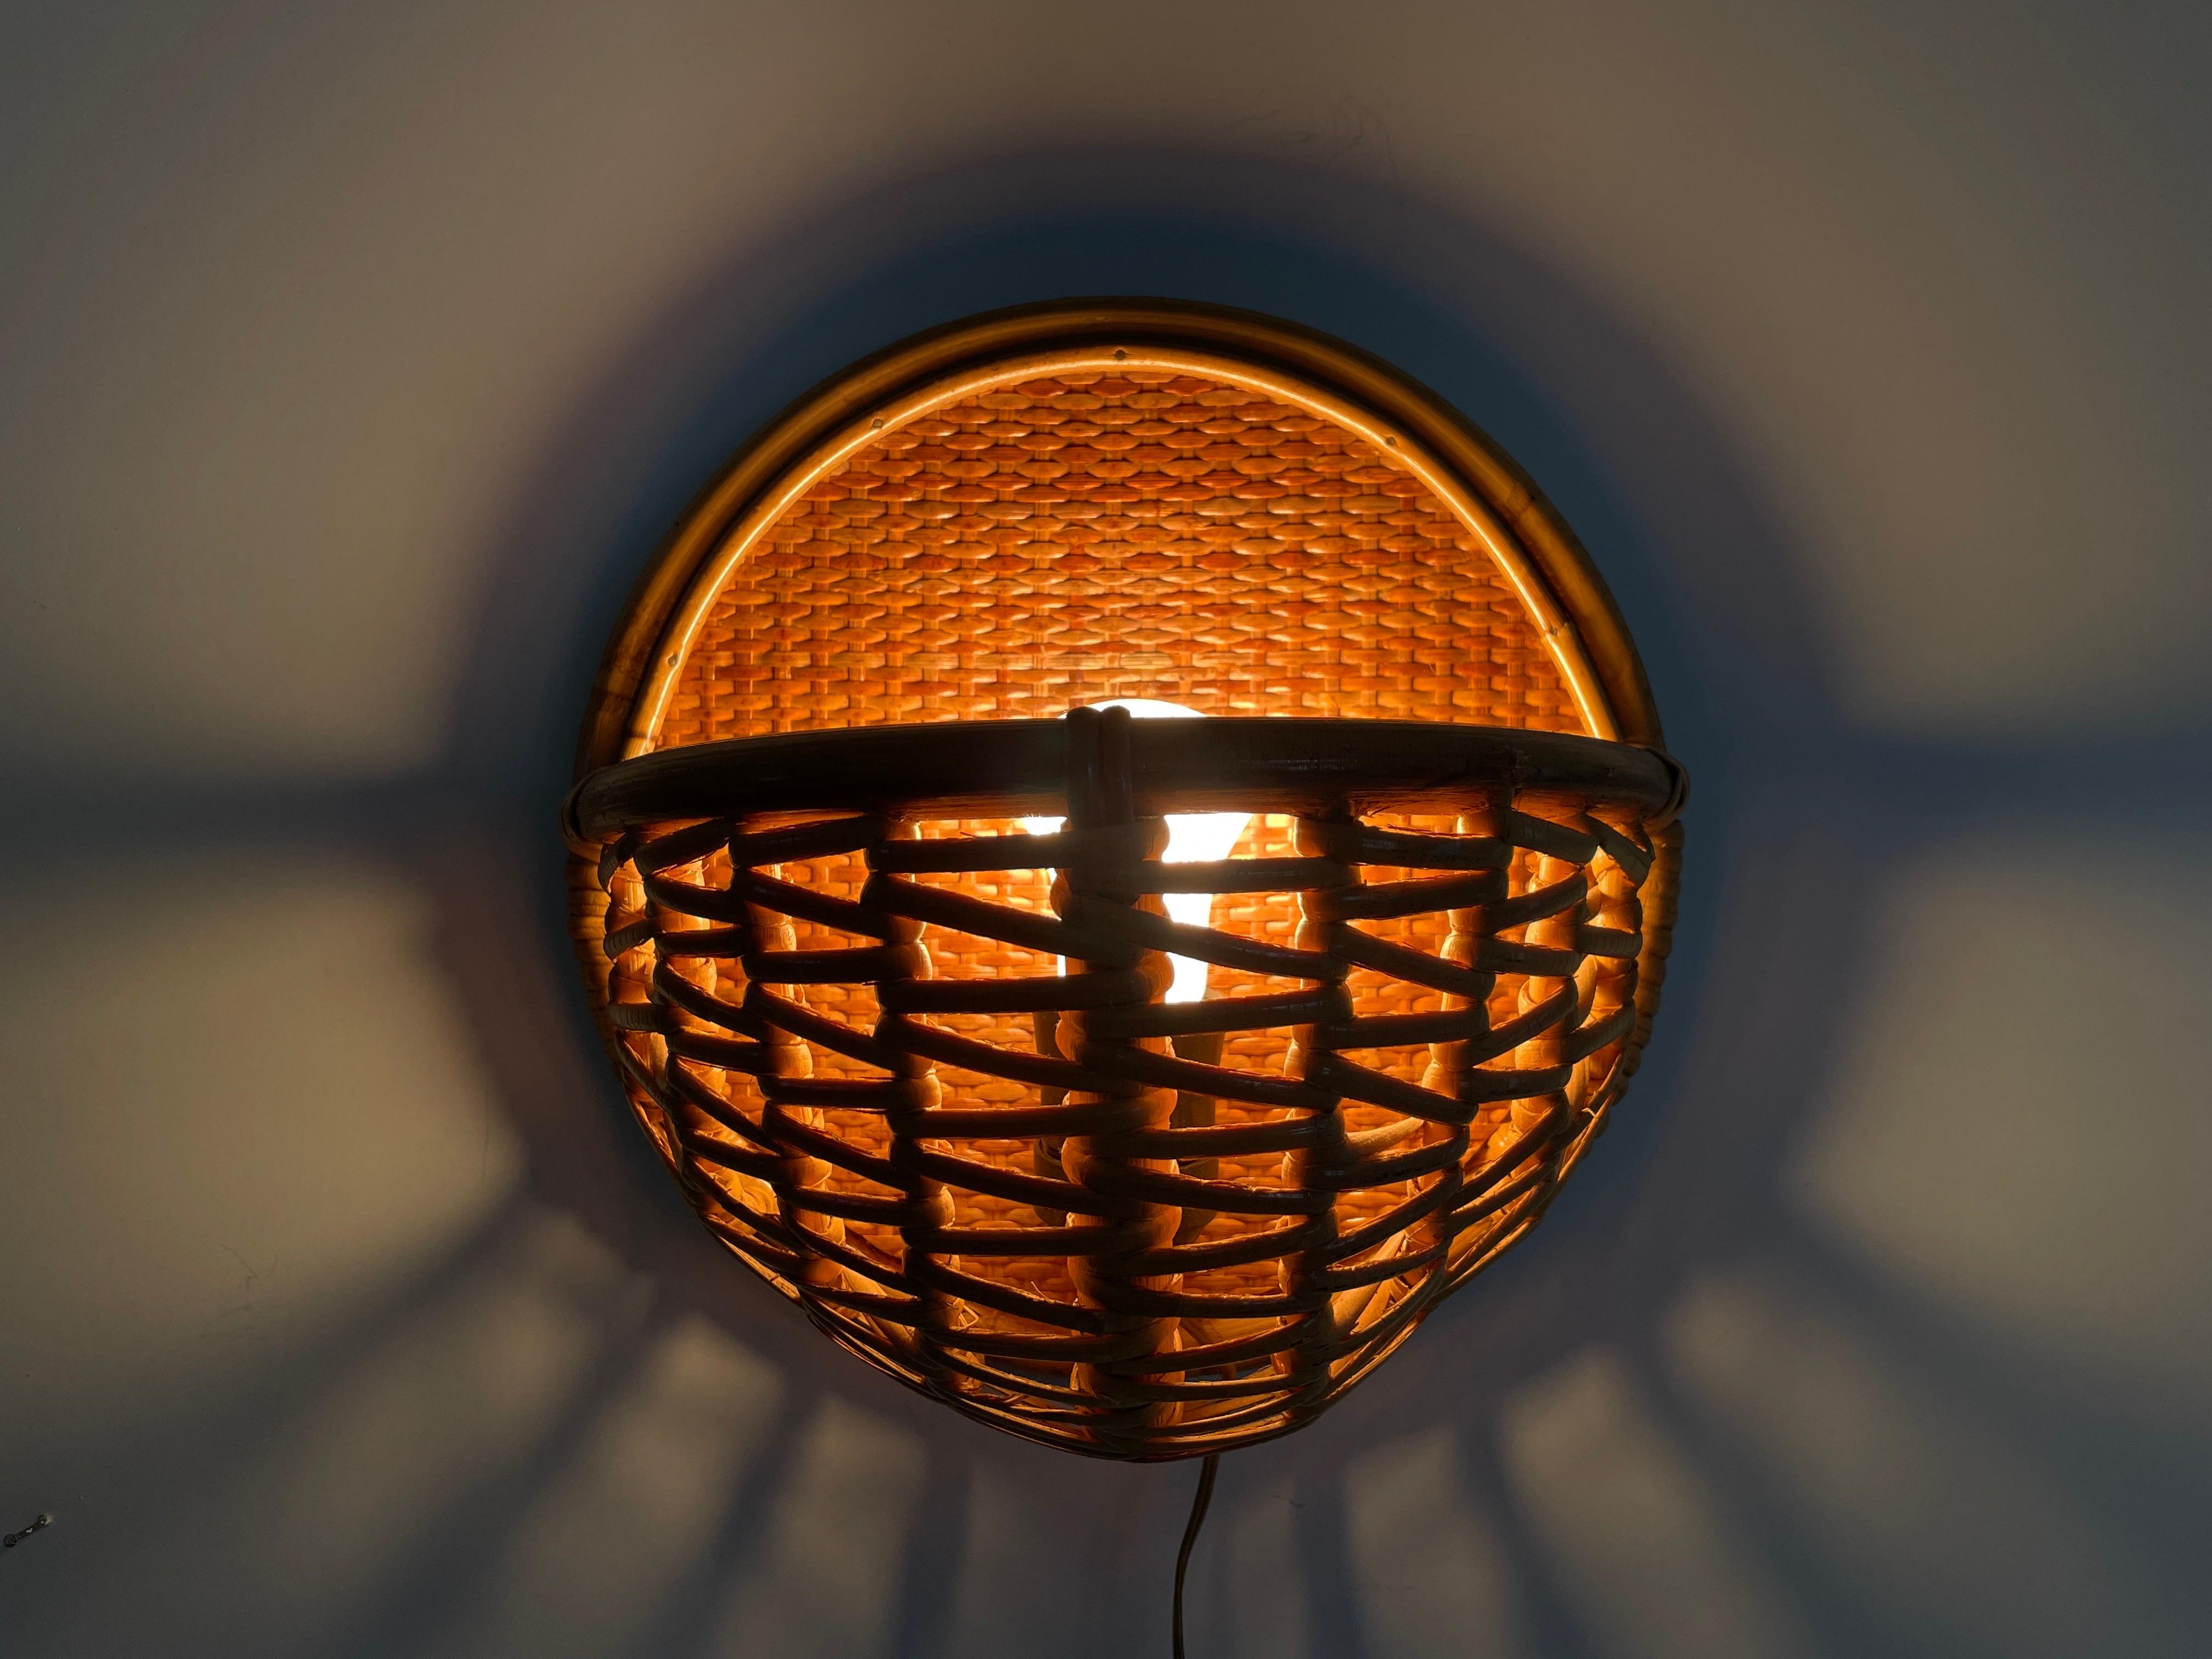 Wicker and Bamboo Round Design Pair of Wall Lamps, 1950s, Italy For Sale 10